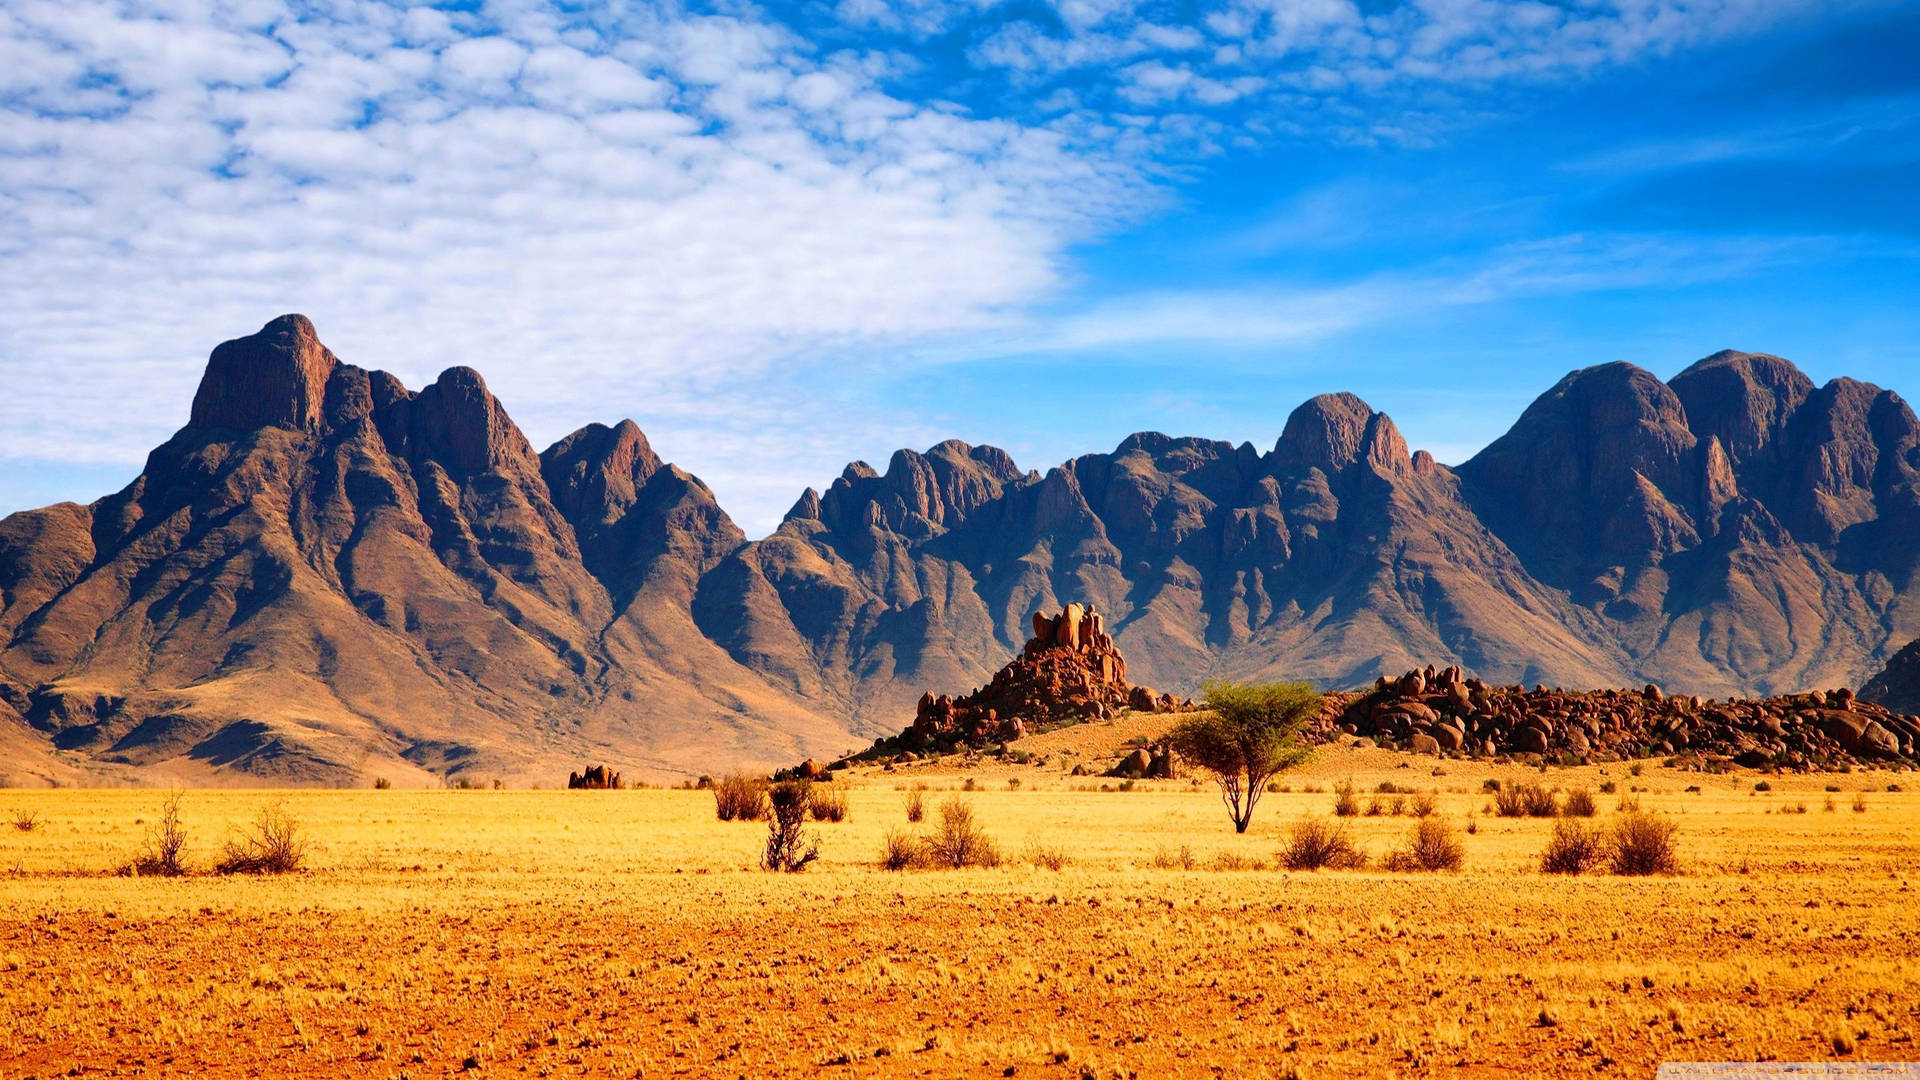 Desert Mountains Ridge In South Africa Background